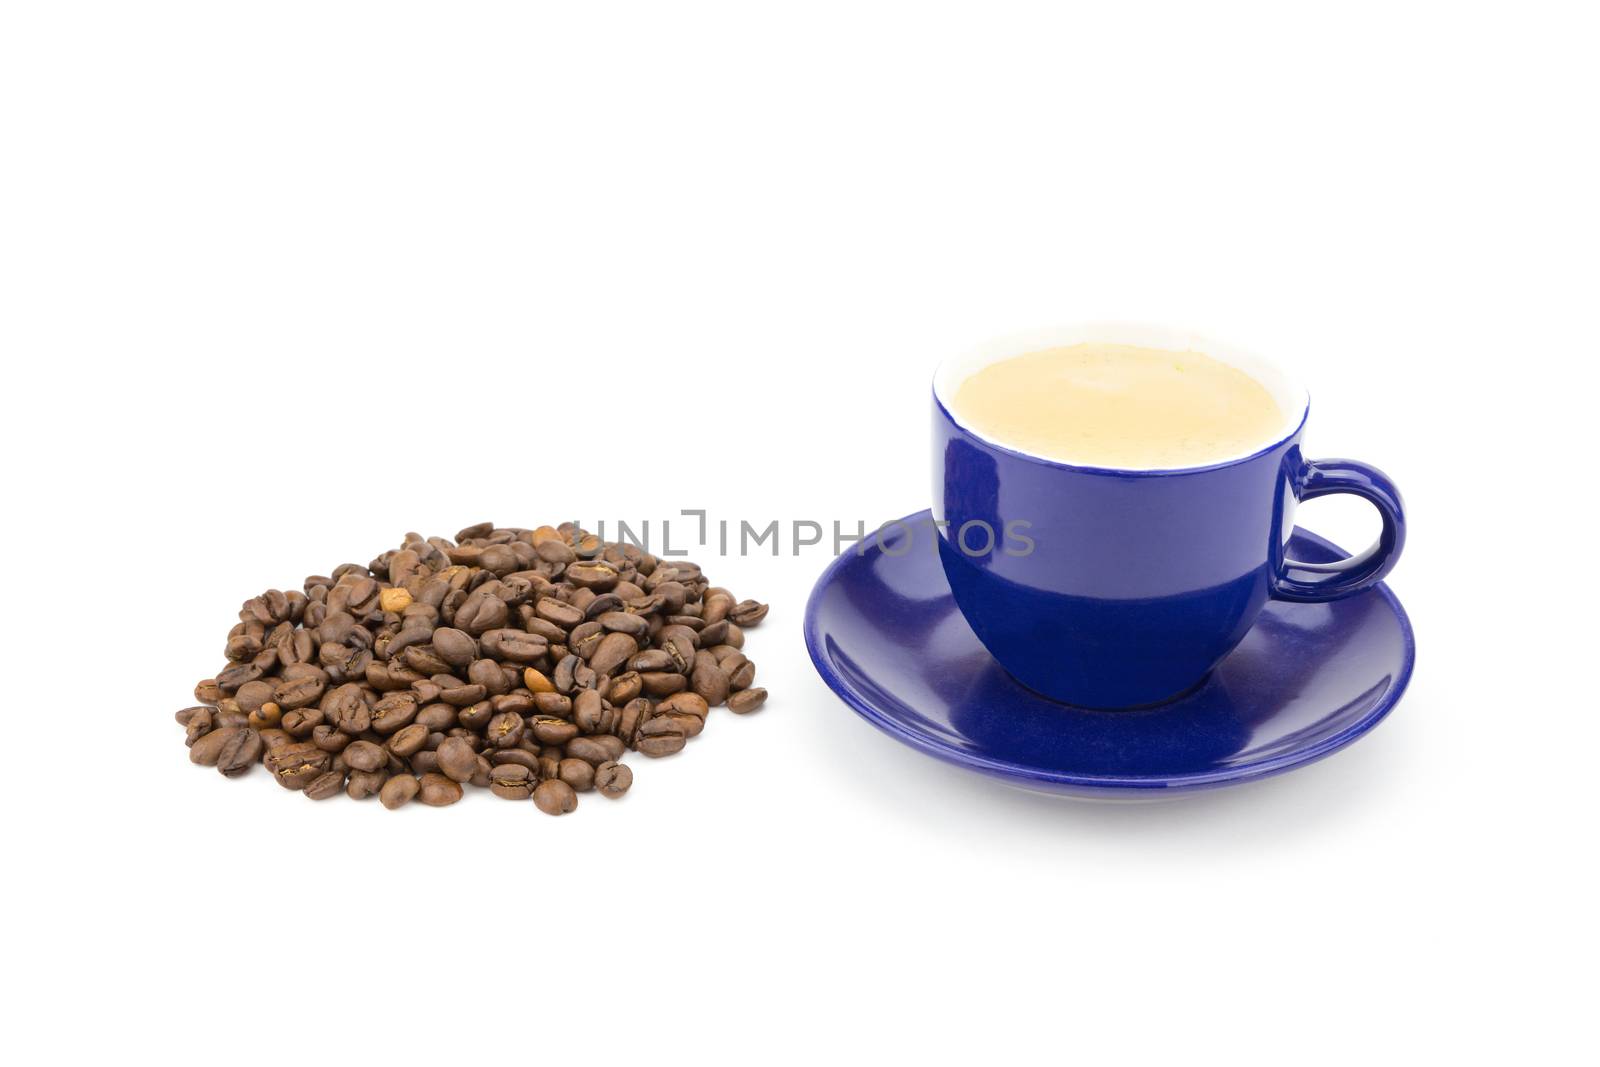 Cup of coffee with coffee beans isolated on white background